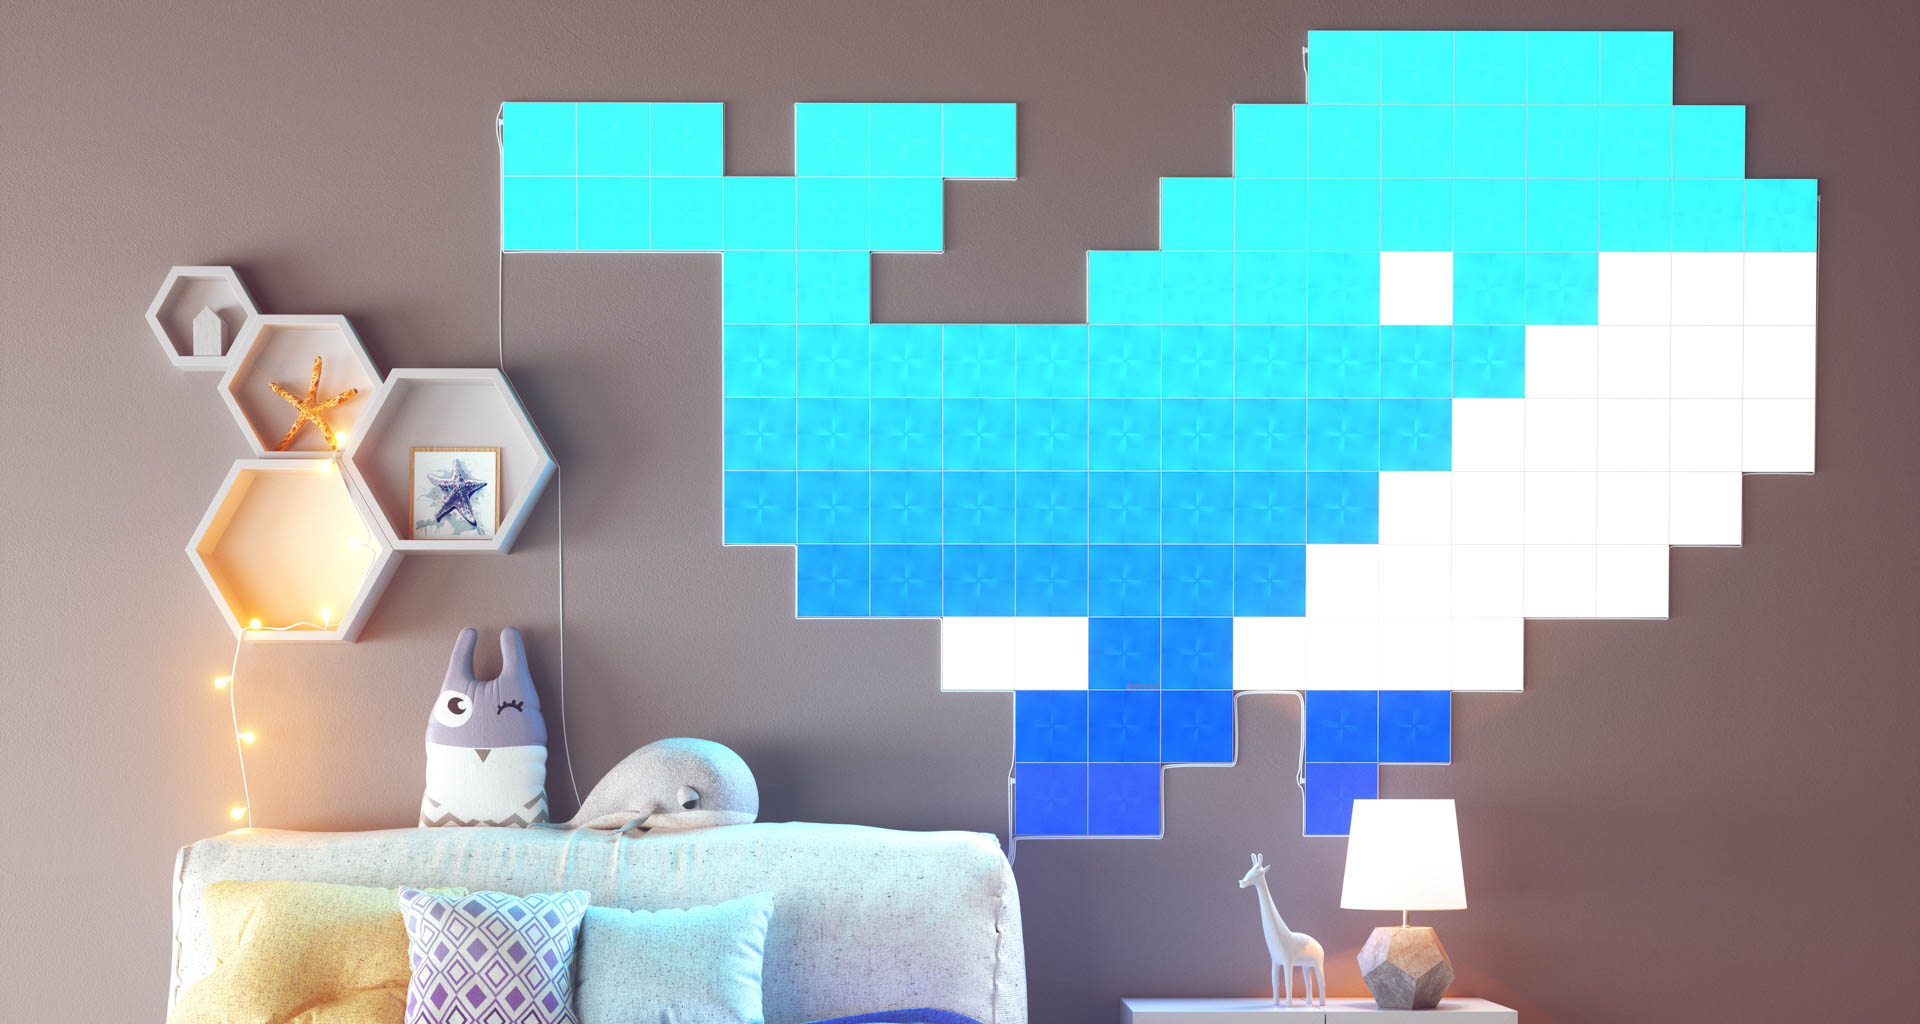 Canvas kits begin with a 9-panel kit at $249. Larger kits bring the cost per panel down somewhat. Image: Nanoleaf.